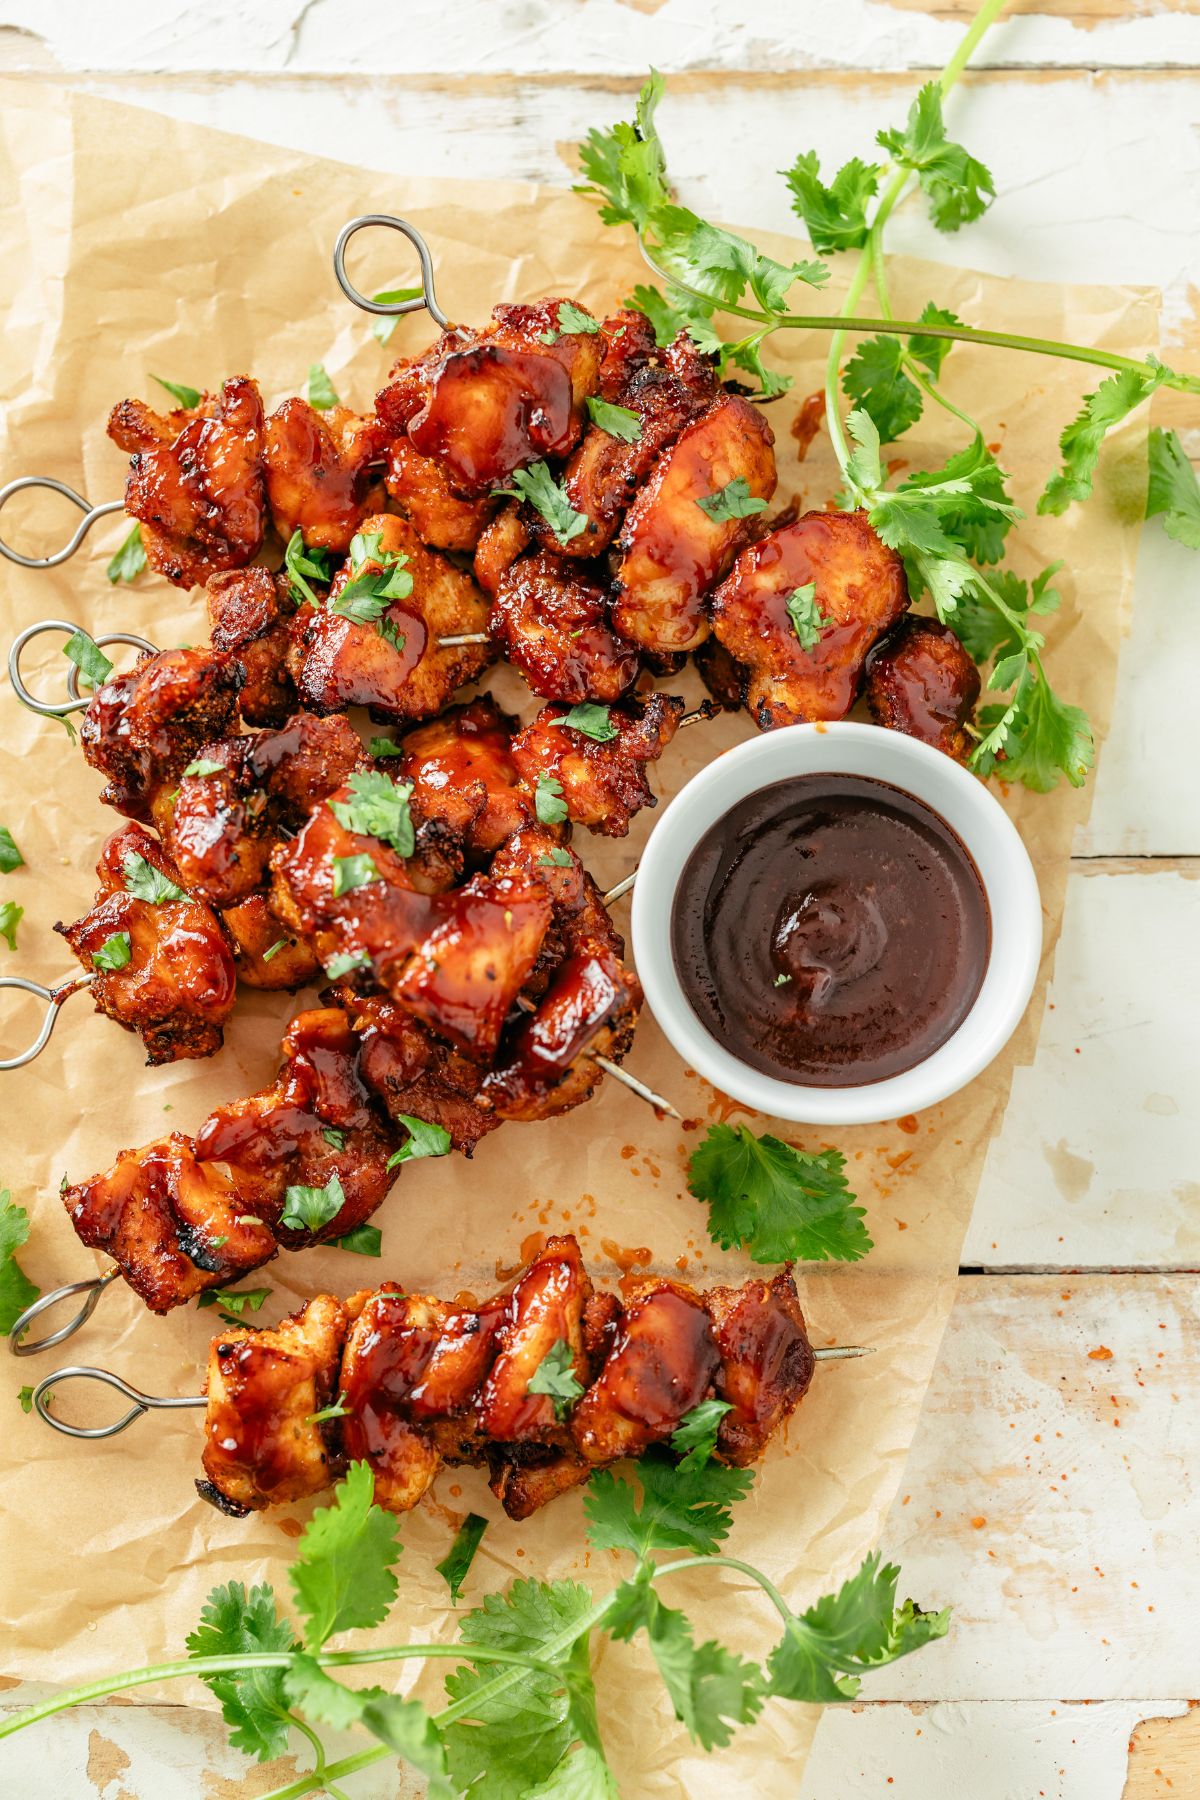 Air-fried chicken skewers with BBQ sauce for dipping, garnished with parsley.